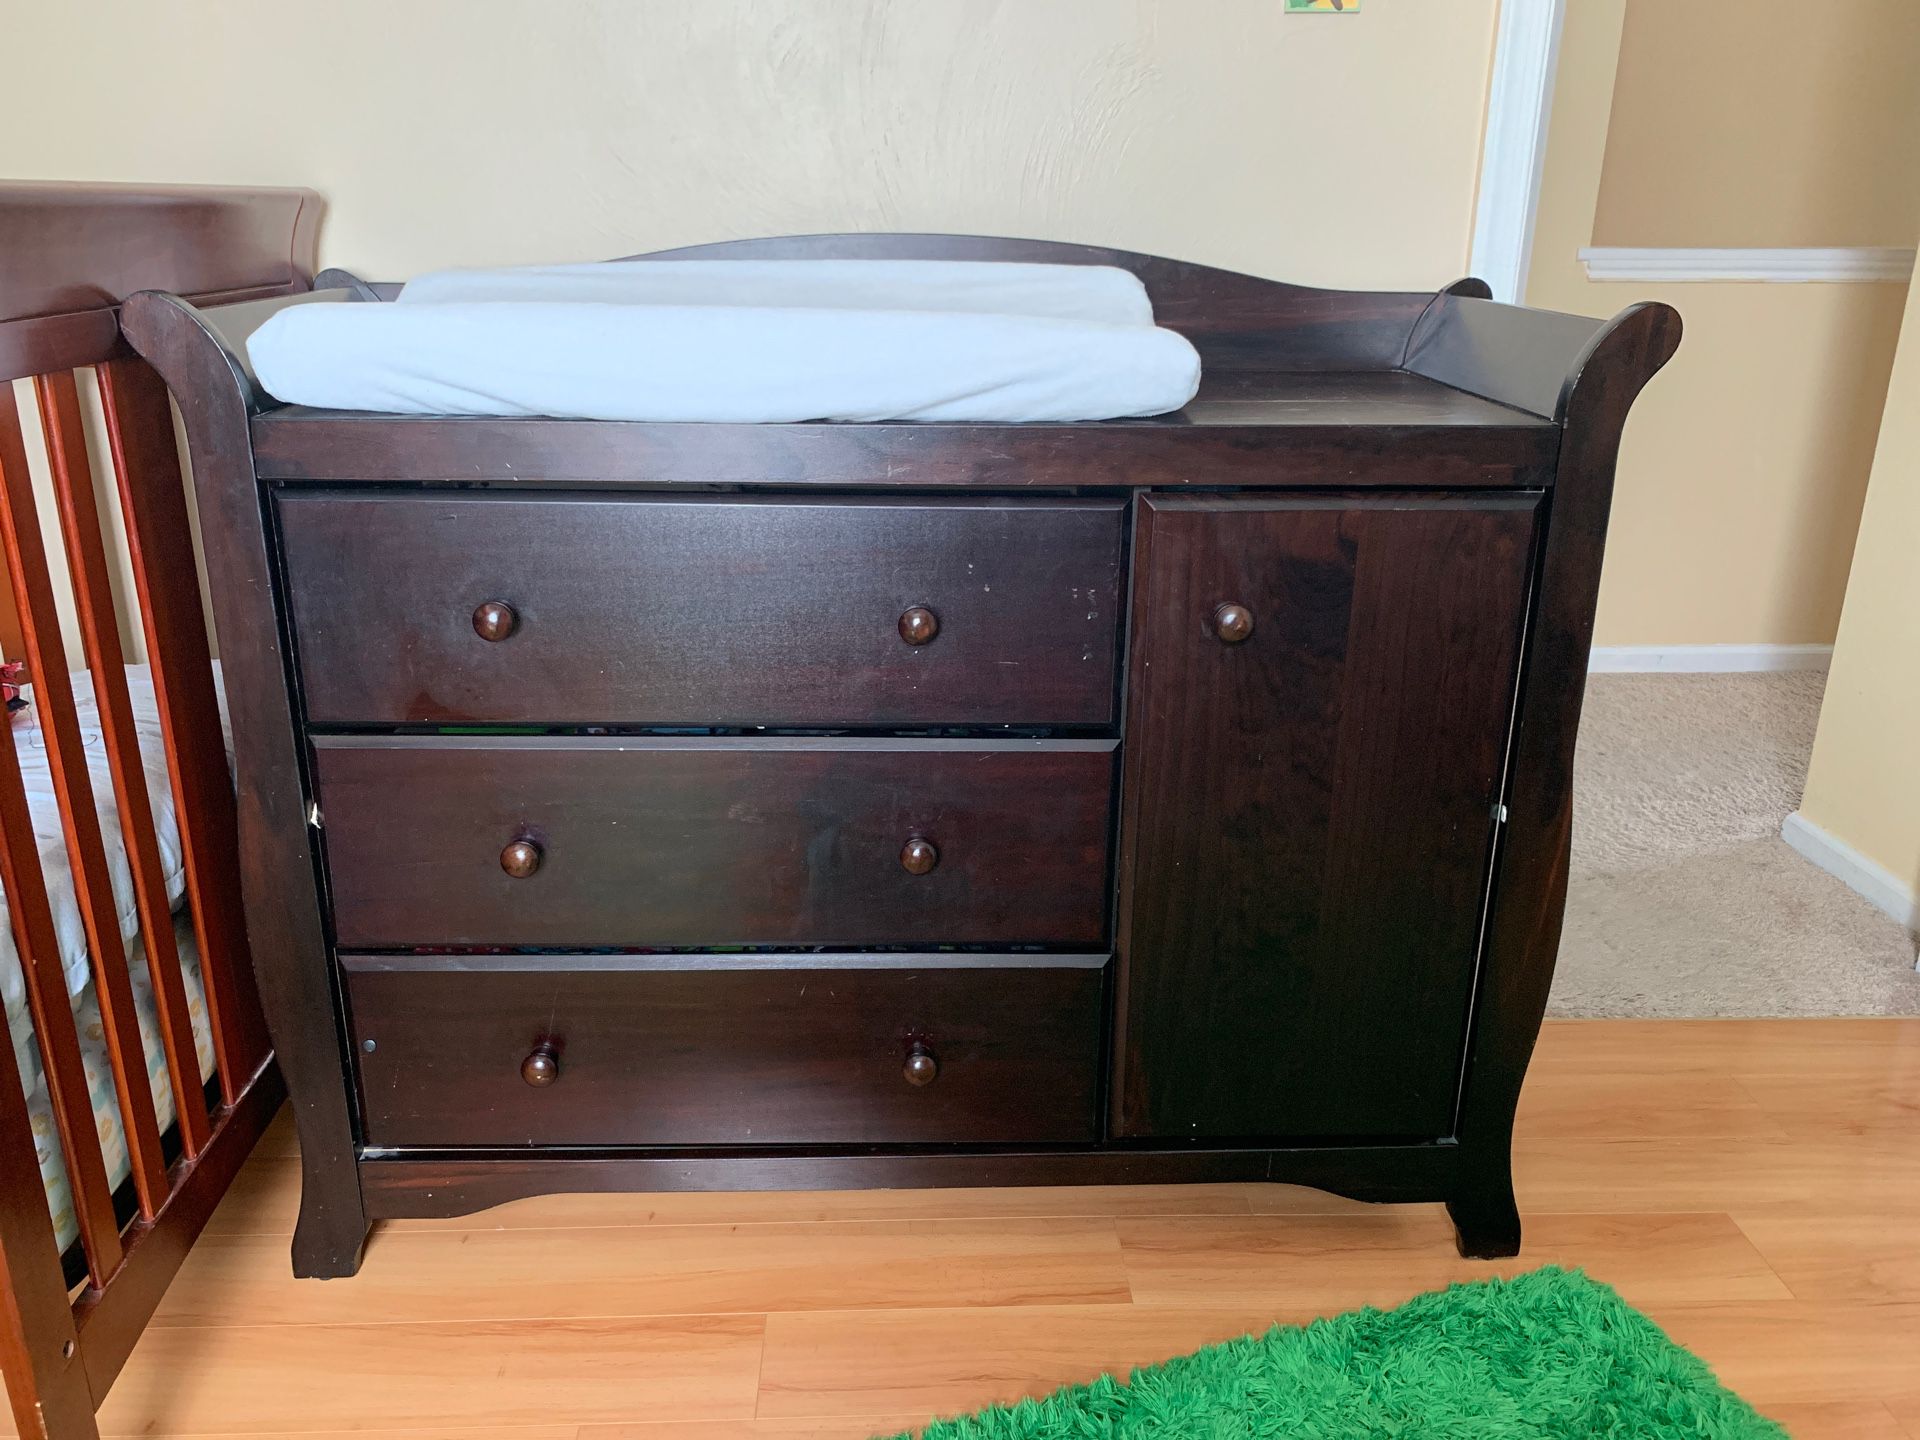 Changing table with 8 covers included